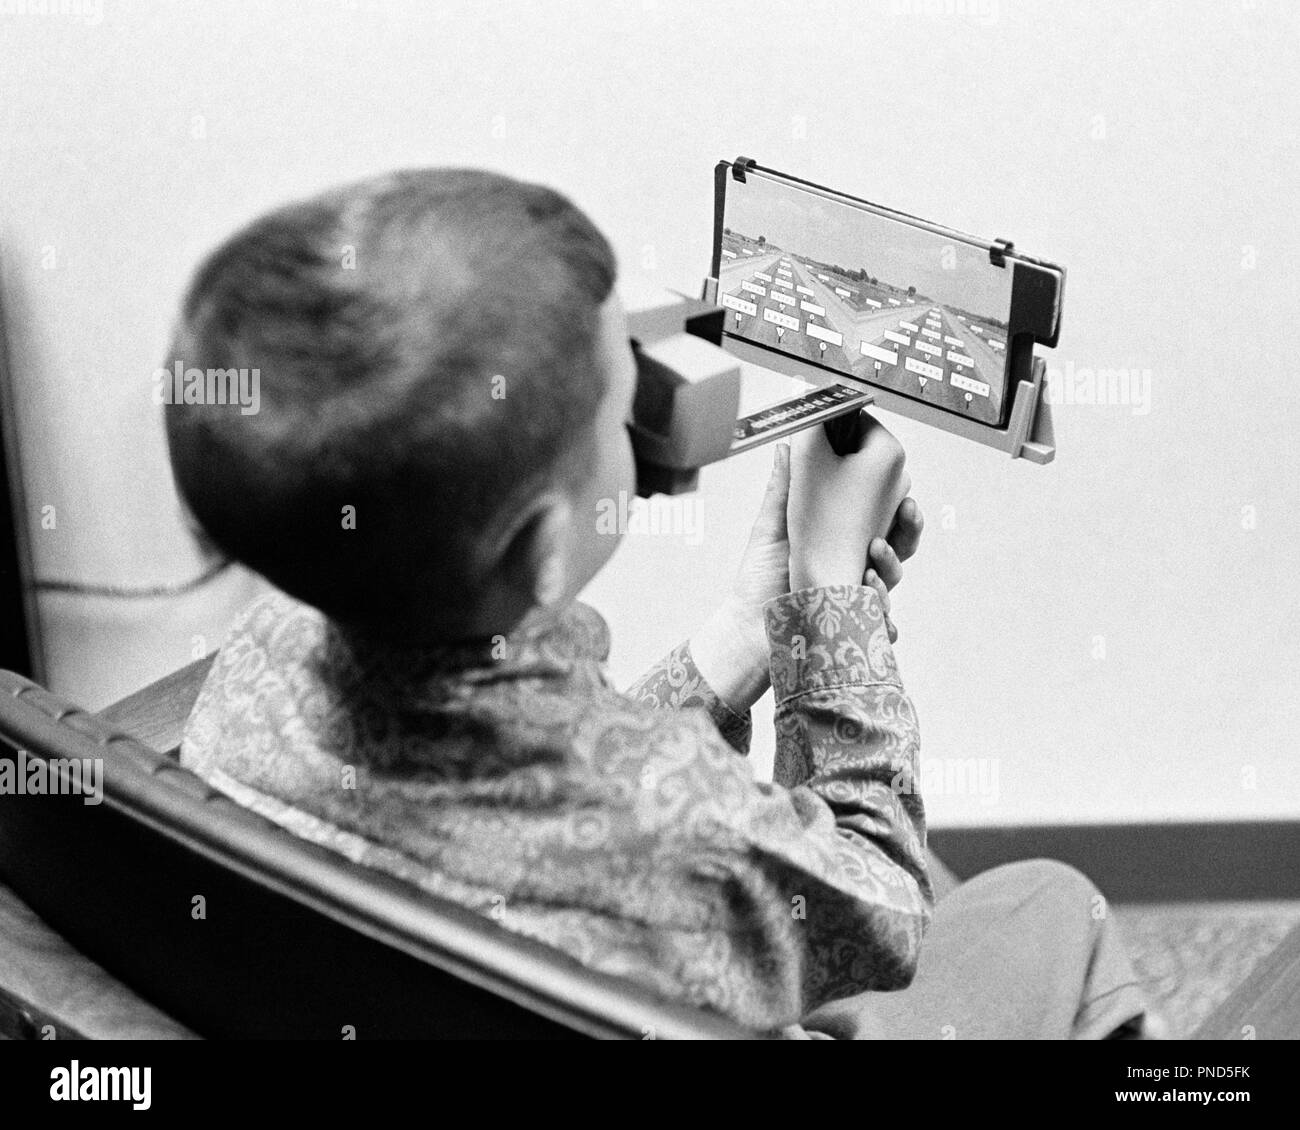 1960s BOY DOING REMEDIAL READING FOR AN EYE DEFECT USING A LENTICULAR STEREOSCOPE - m8076 HAR001 HARS MUSCLES OPTICS PERCEPTION READER IMAGES BACK VIEW DEVICE GROWTH JUVENILES PRE-TEEN PRE-TEEN BOY STEREOSCOPE BLACK AND WHITE CAUCASIAN ETHNICITY HAR001 OLD FASHIONED OLIVER WENDELL HOLMES PERSPECTIVE Stock Photo